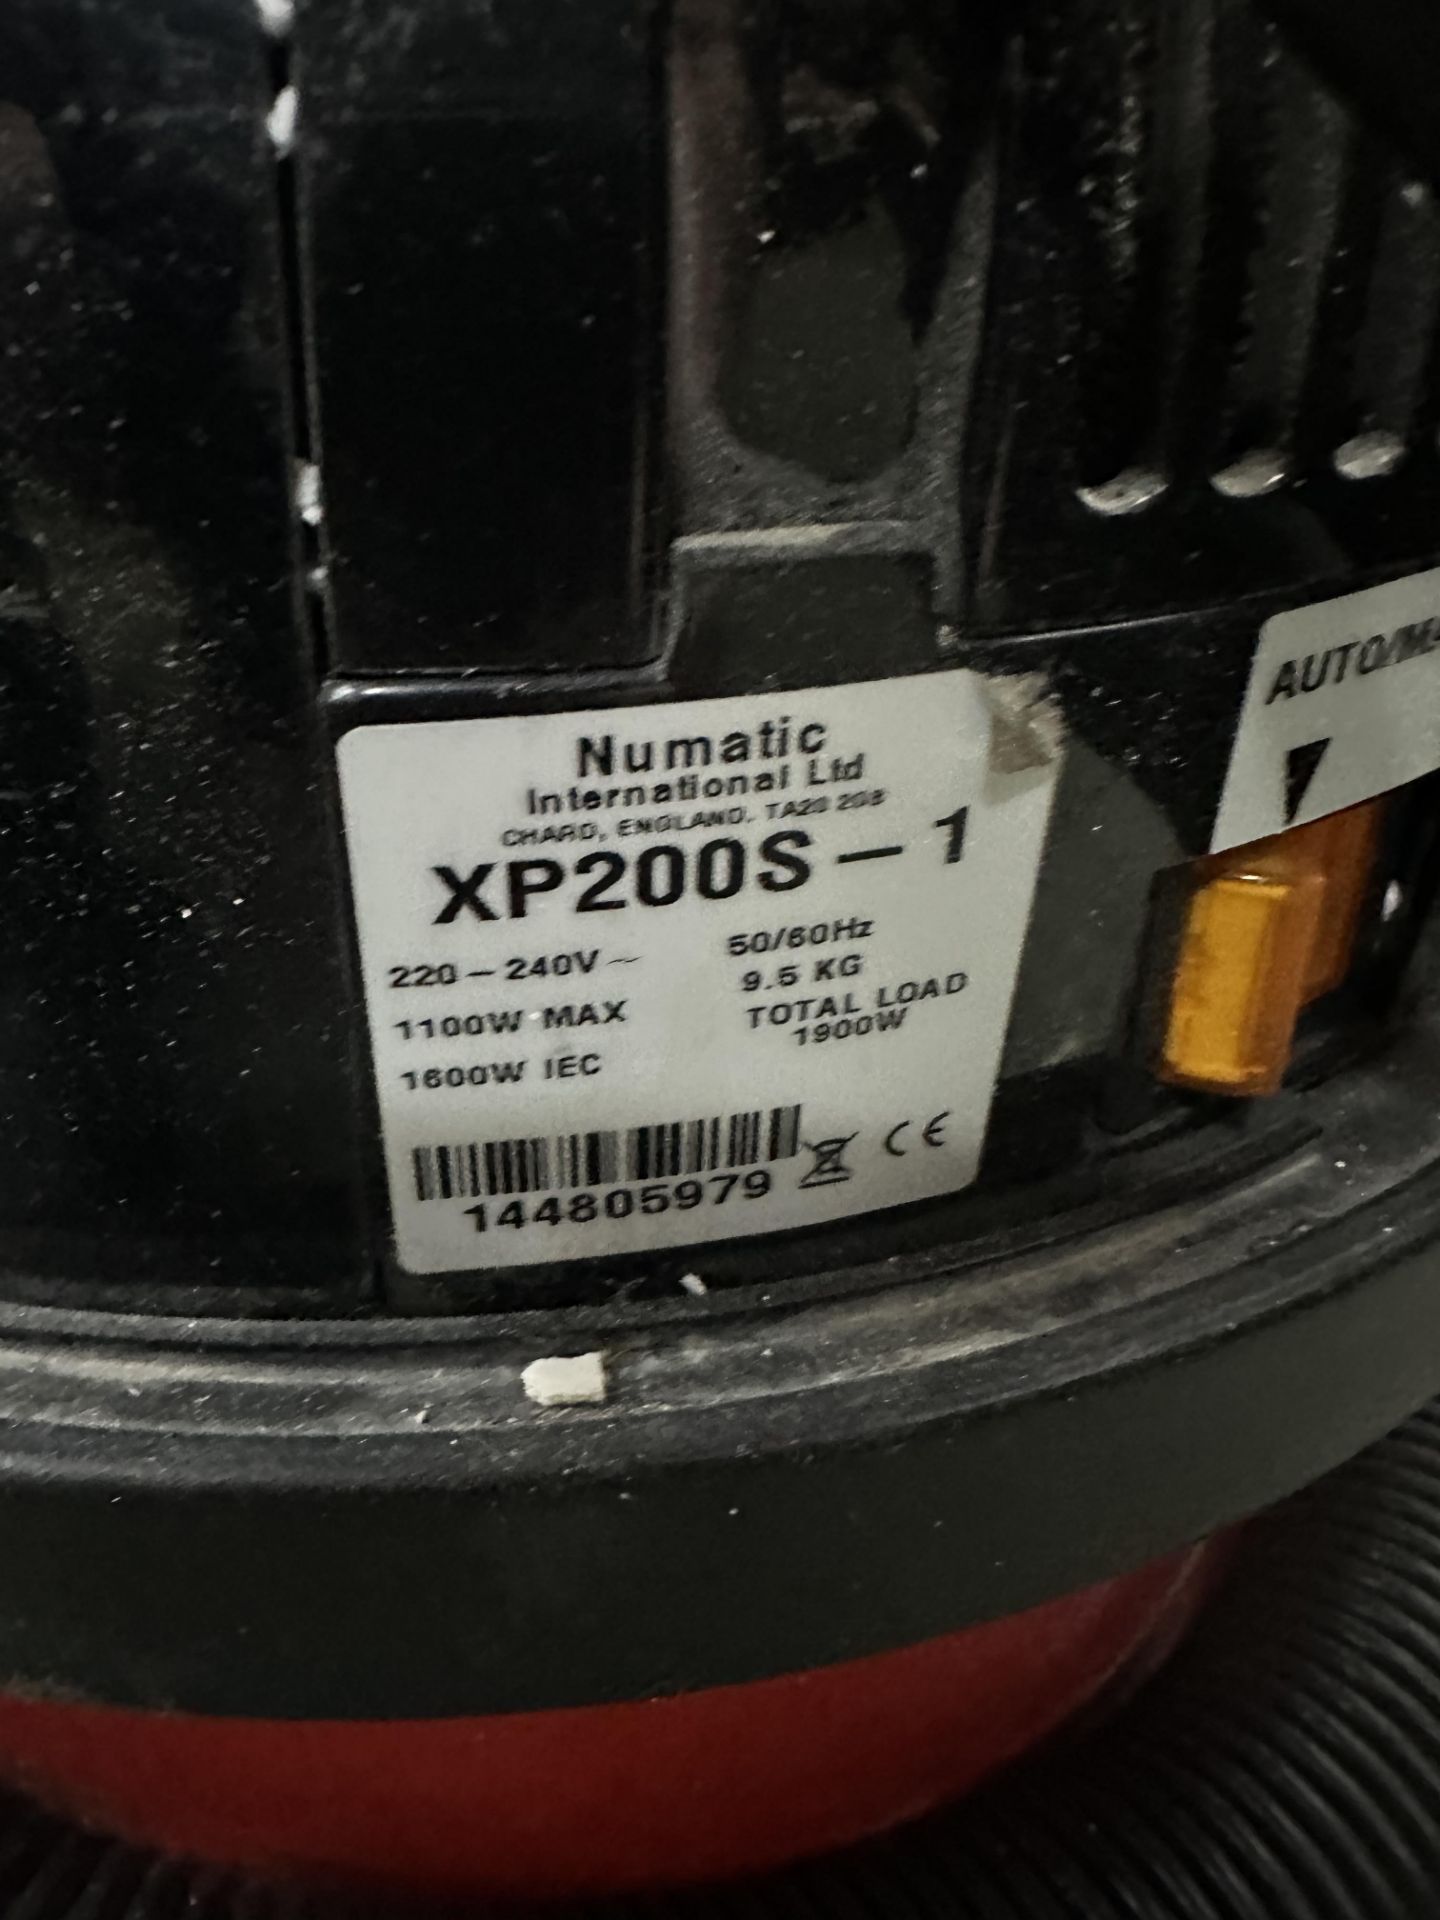 Numatic Henry XP200S-1 vacuum cleaner - Image 2 of 3